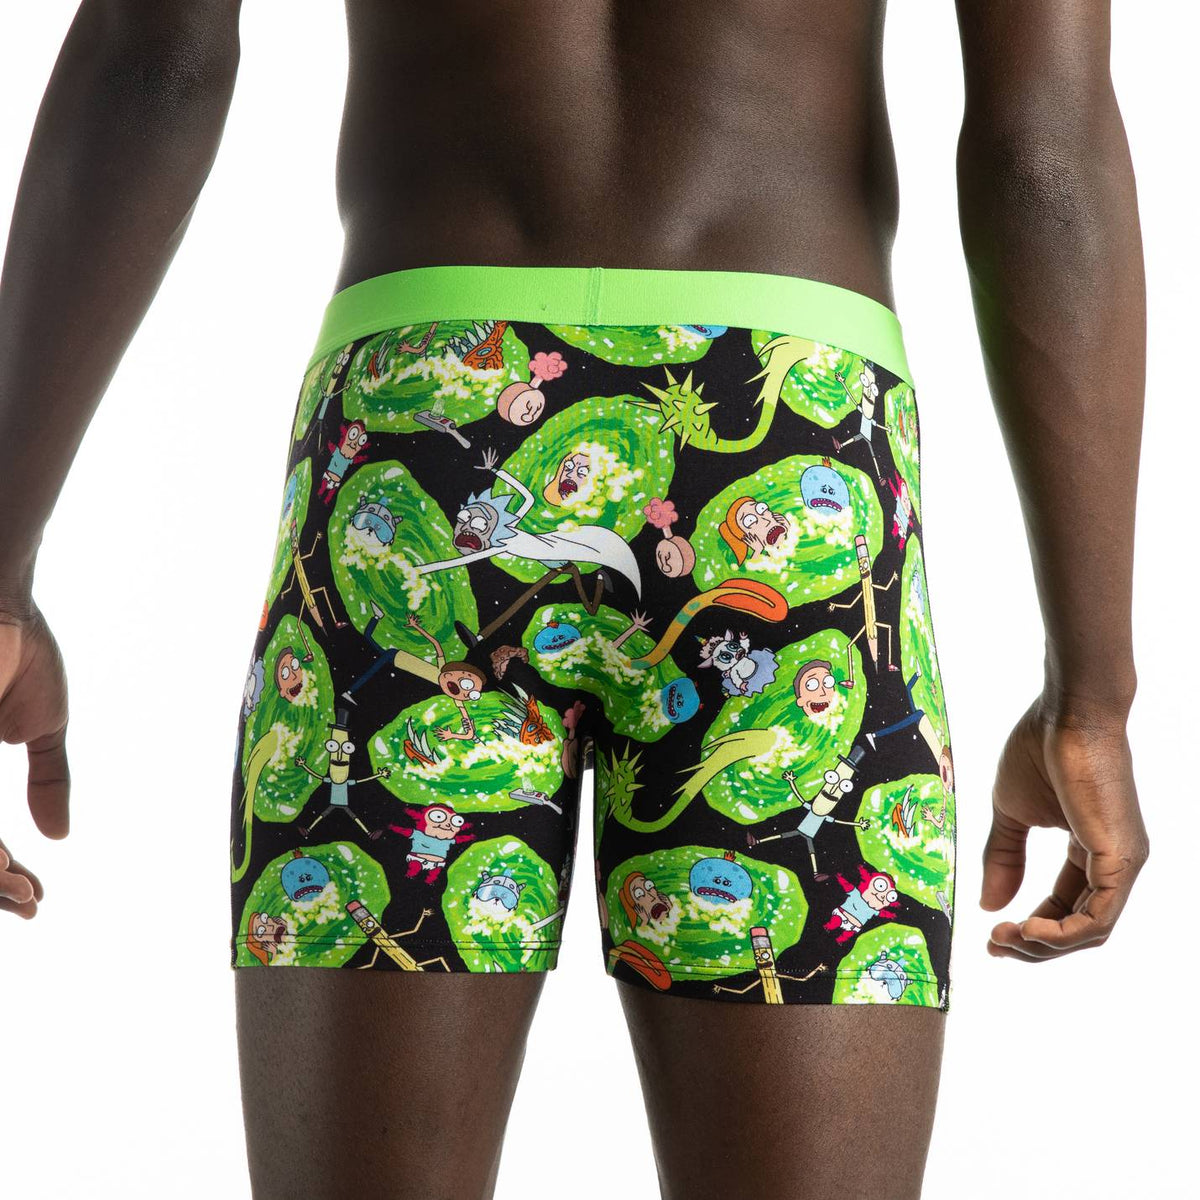  RICK AND MORTY Rick and Morty Men's Boxer Brief and Crew Sock  Combo Set, Small Black MBSB8432 0 : Clothing, Shoes & Jewelry